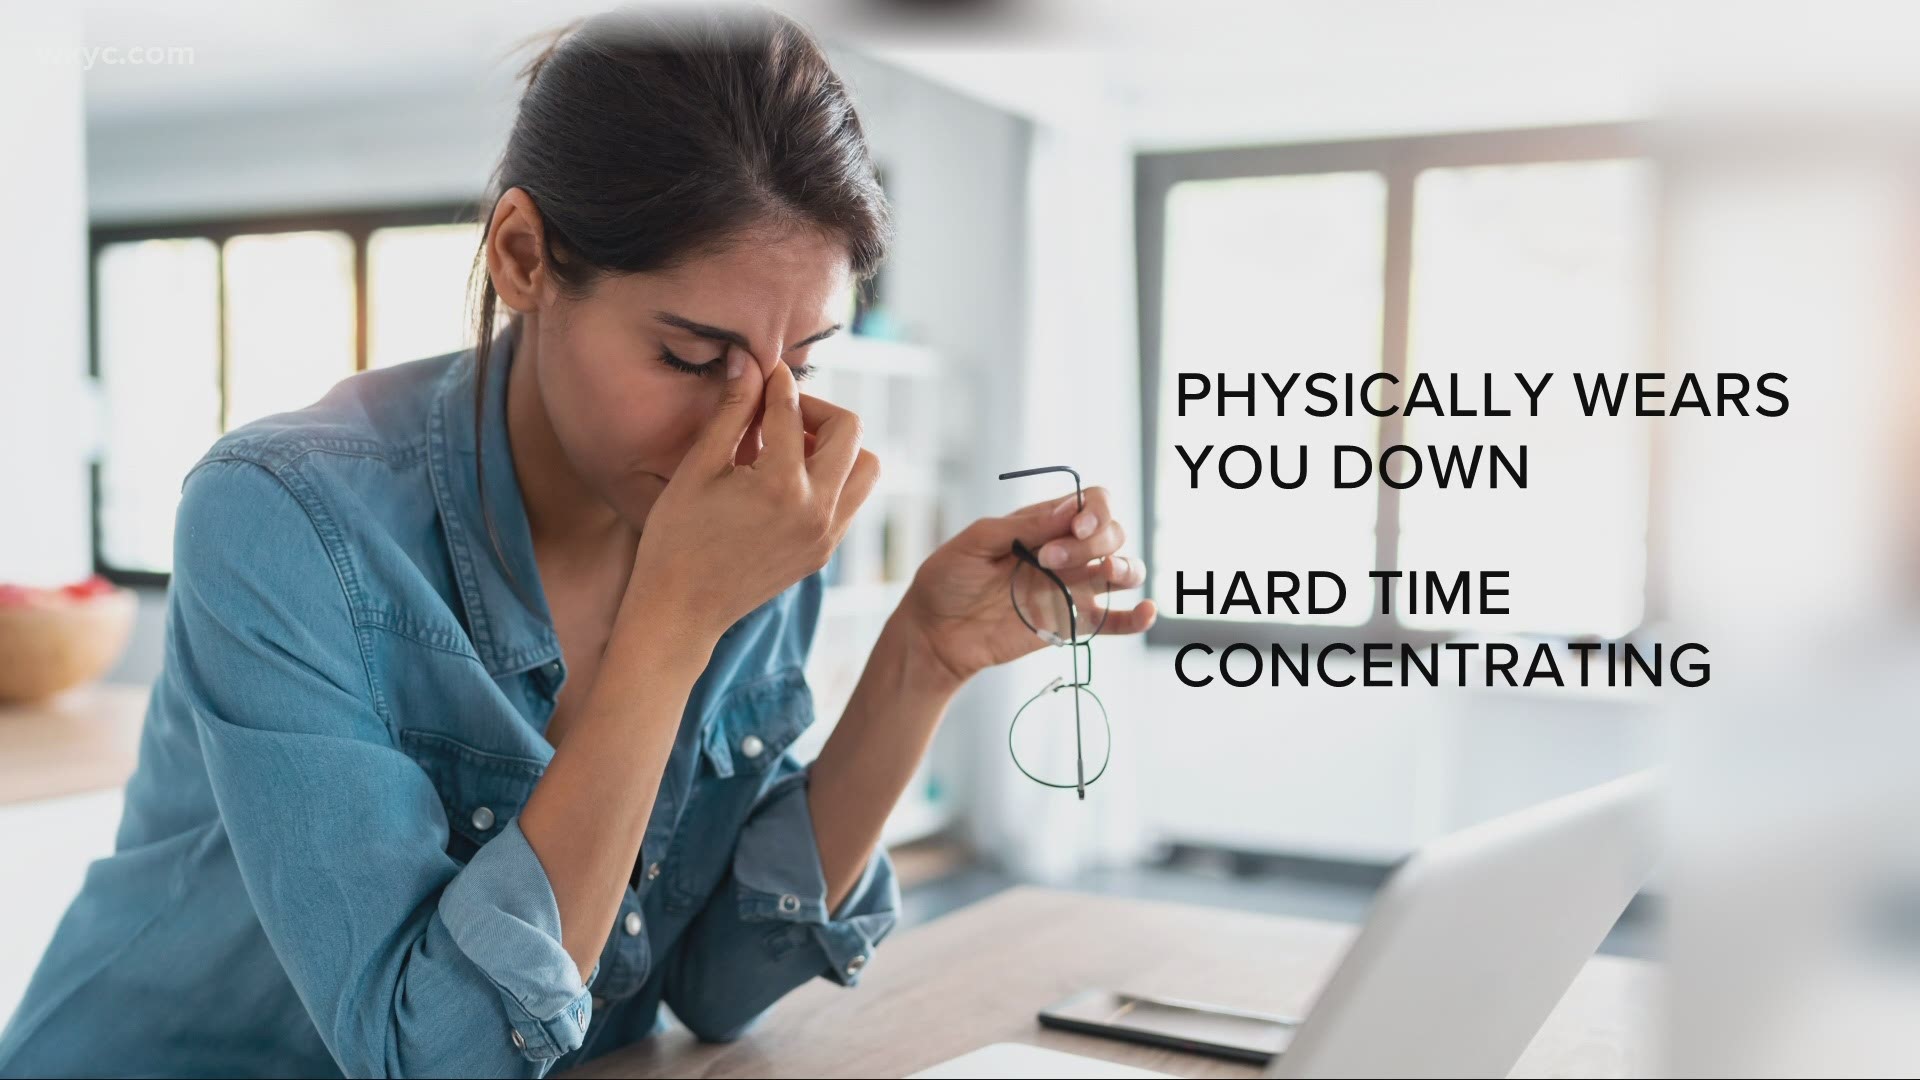 This is a real issue impacting workers across the country.  In today's Wellness Wednesday, we talked to a doctor about how to beat this fatigue.